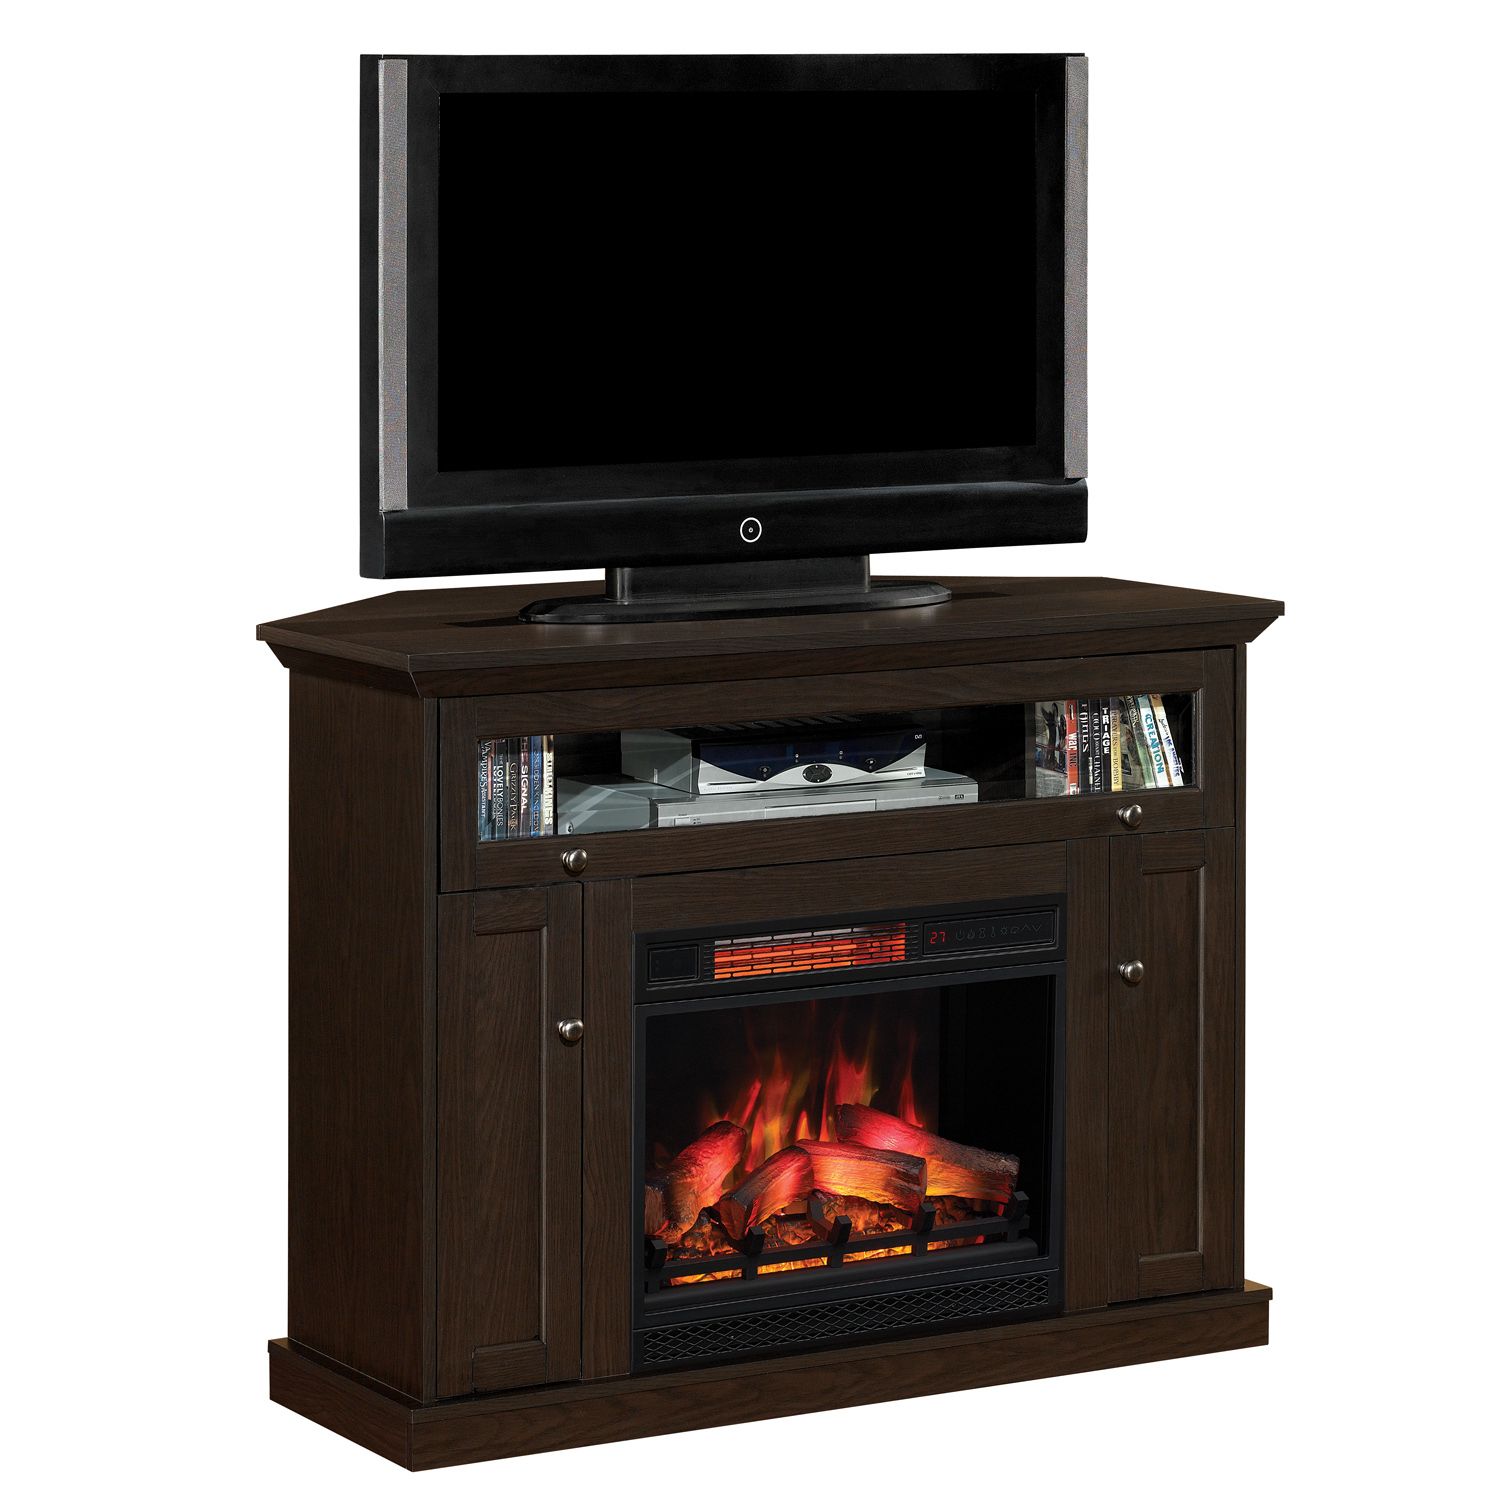 Windsor Espresso Tv Stand Fireplace | Classicflame United Inside Expresso Tv Stands (View 13 of 15)